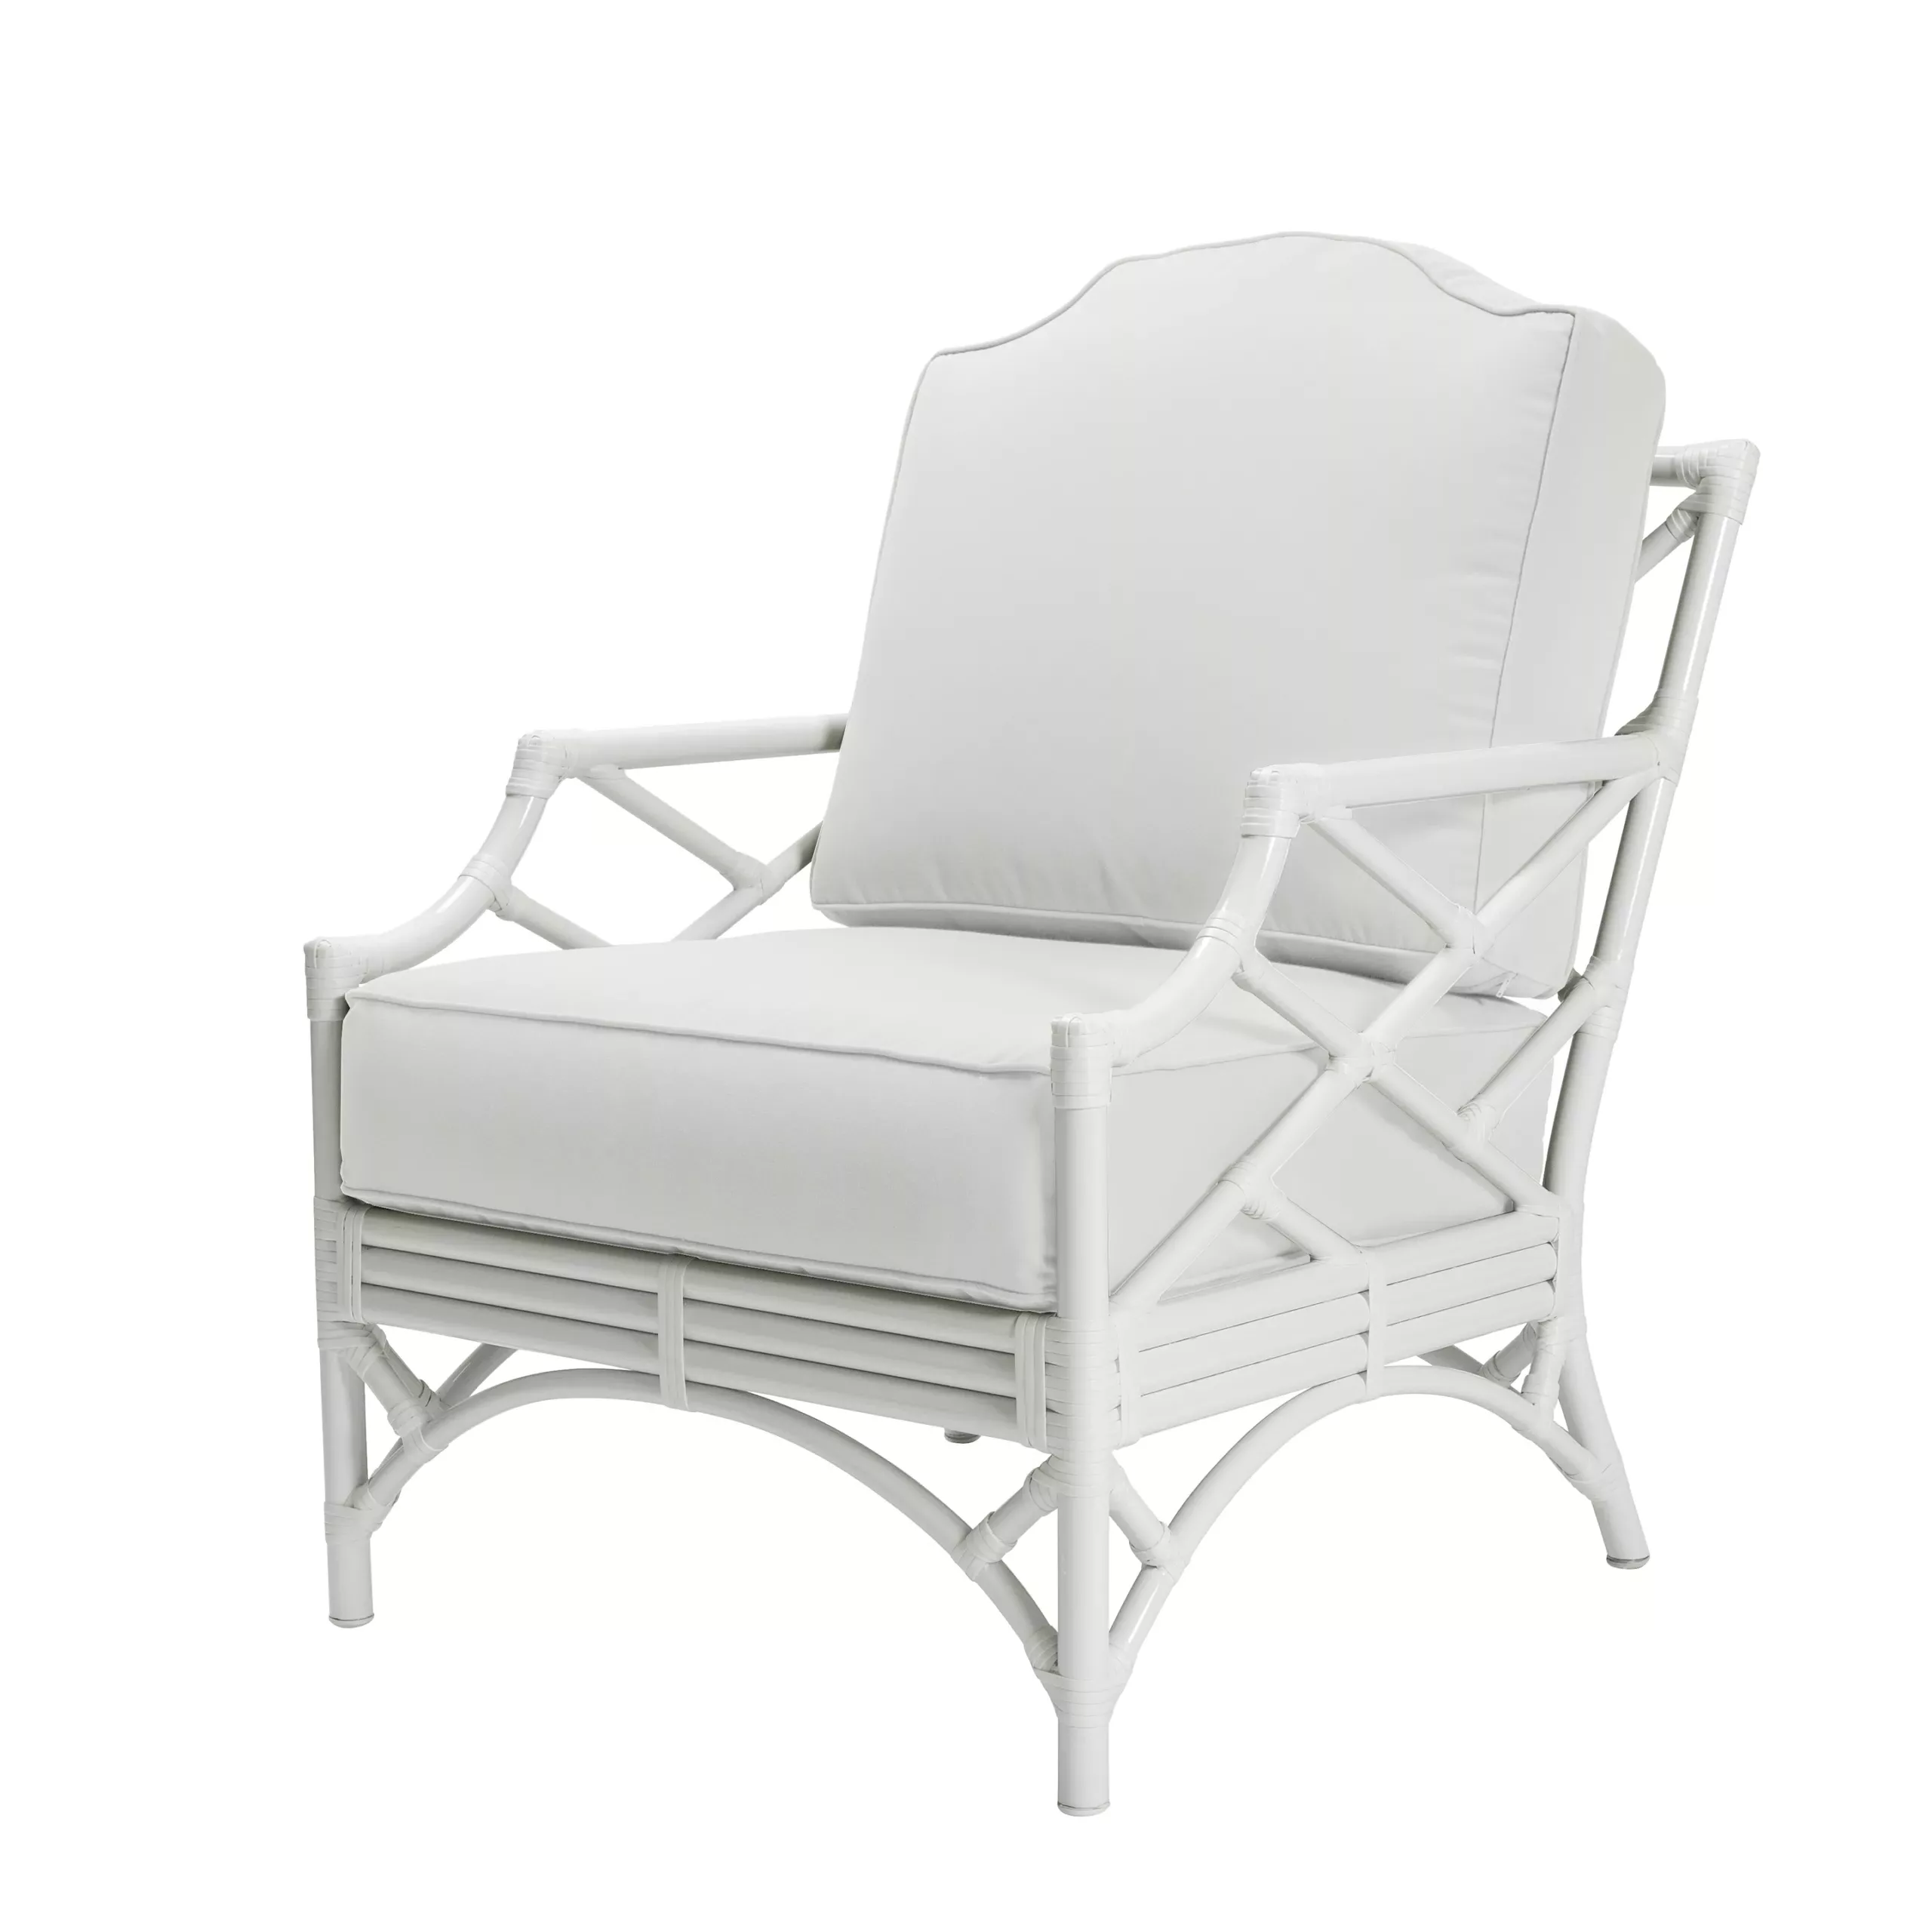 Chippendale White Chair - PEAK Event Services